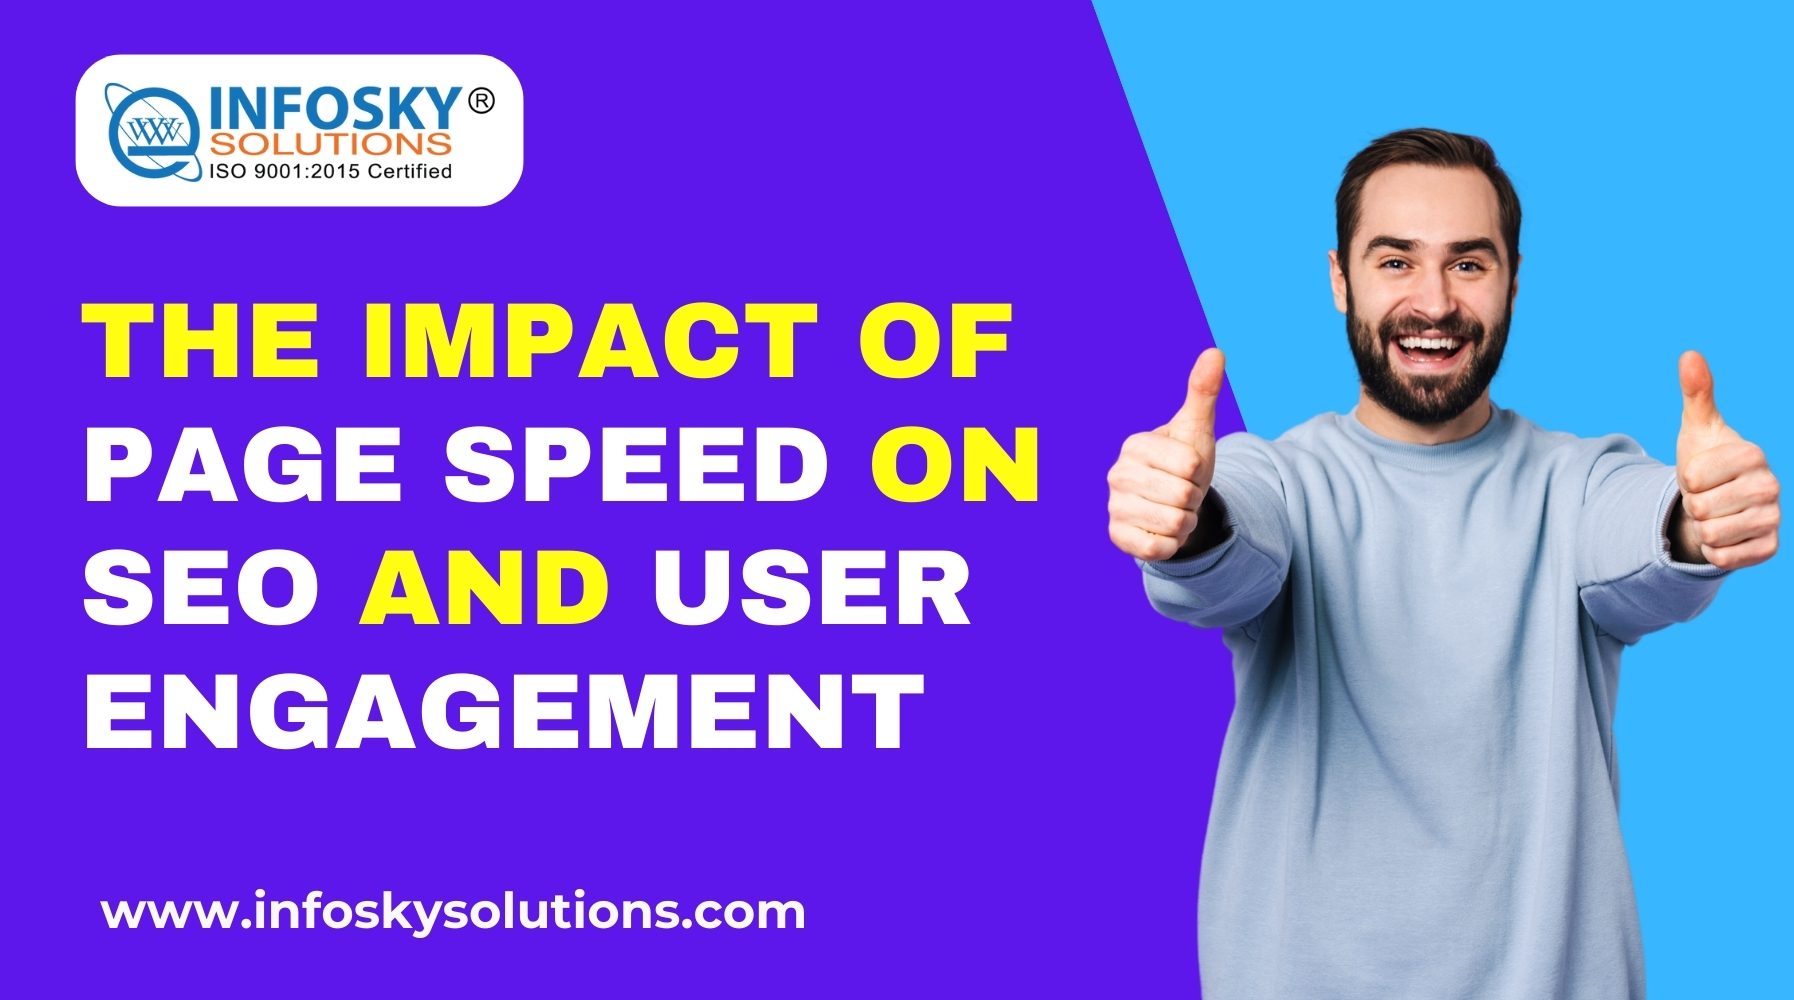 The Impact of Page Speed on SEO and User Engagement